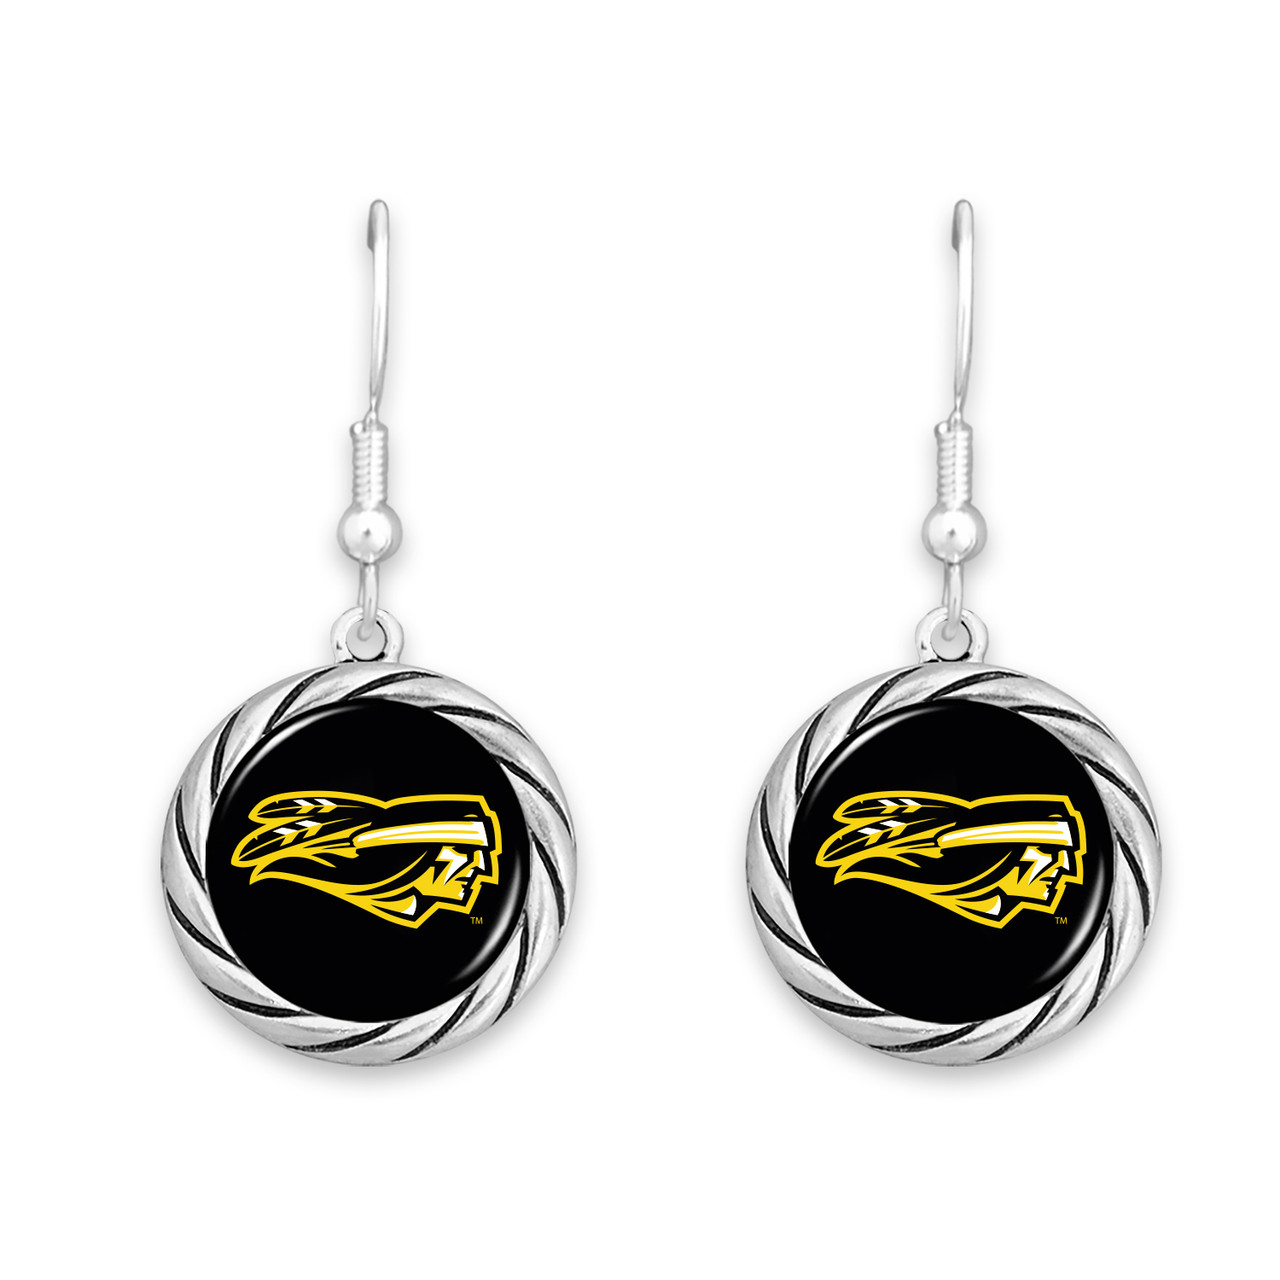 Tyler Apaches  Earrings- Twisted Rope